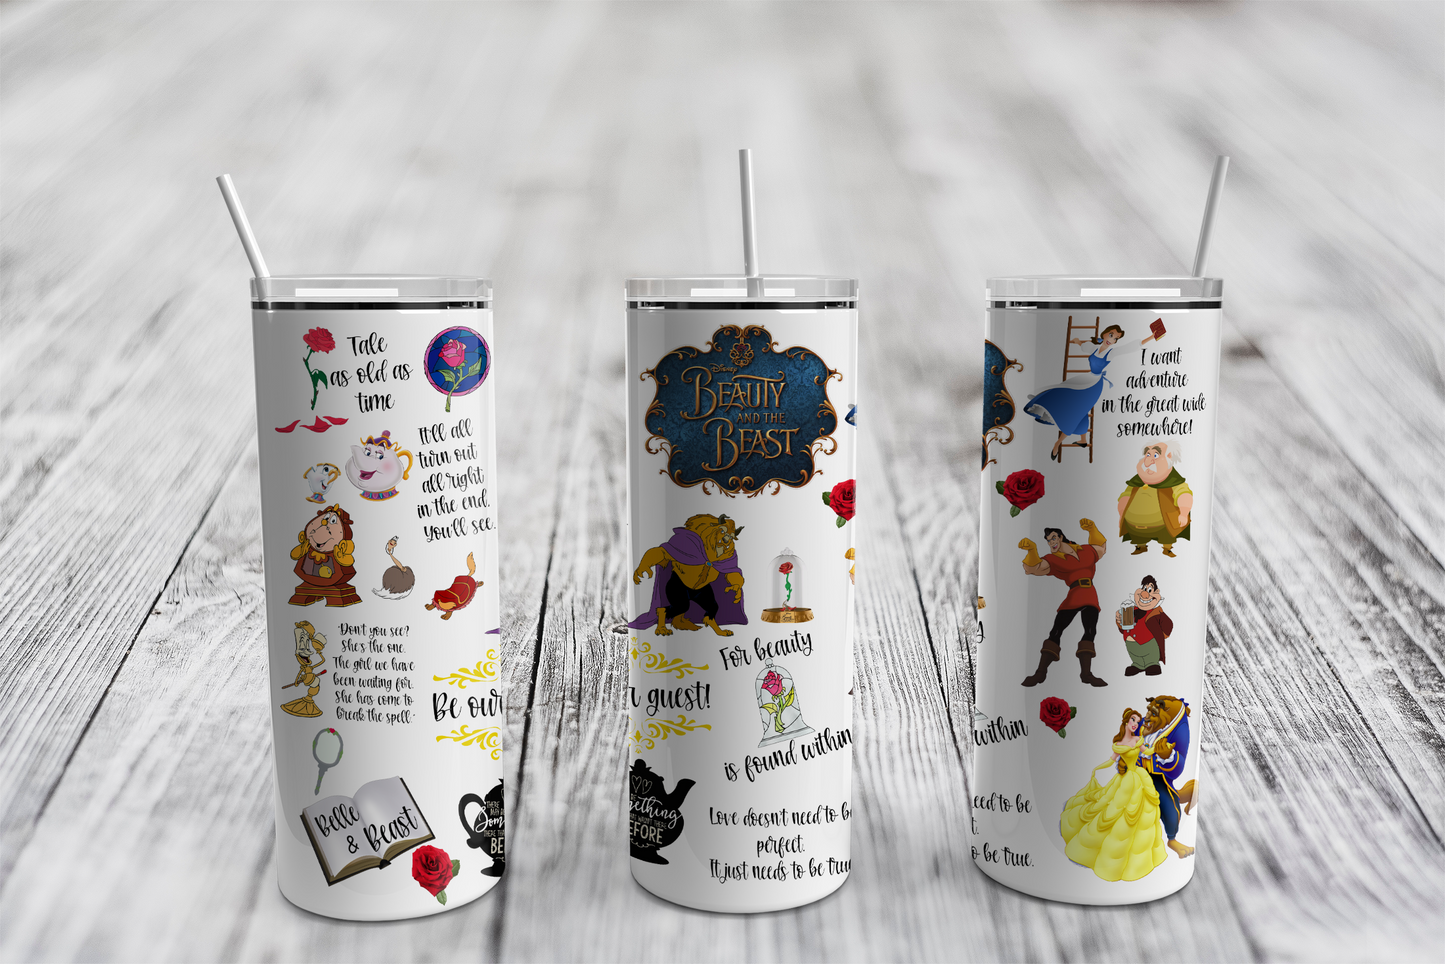 Disney's Beauty And The Beast Tumbler Write review | Ask question